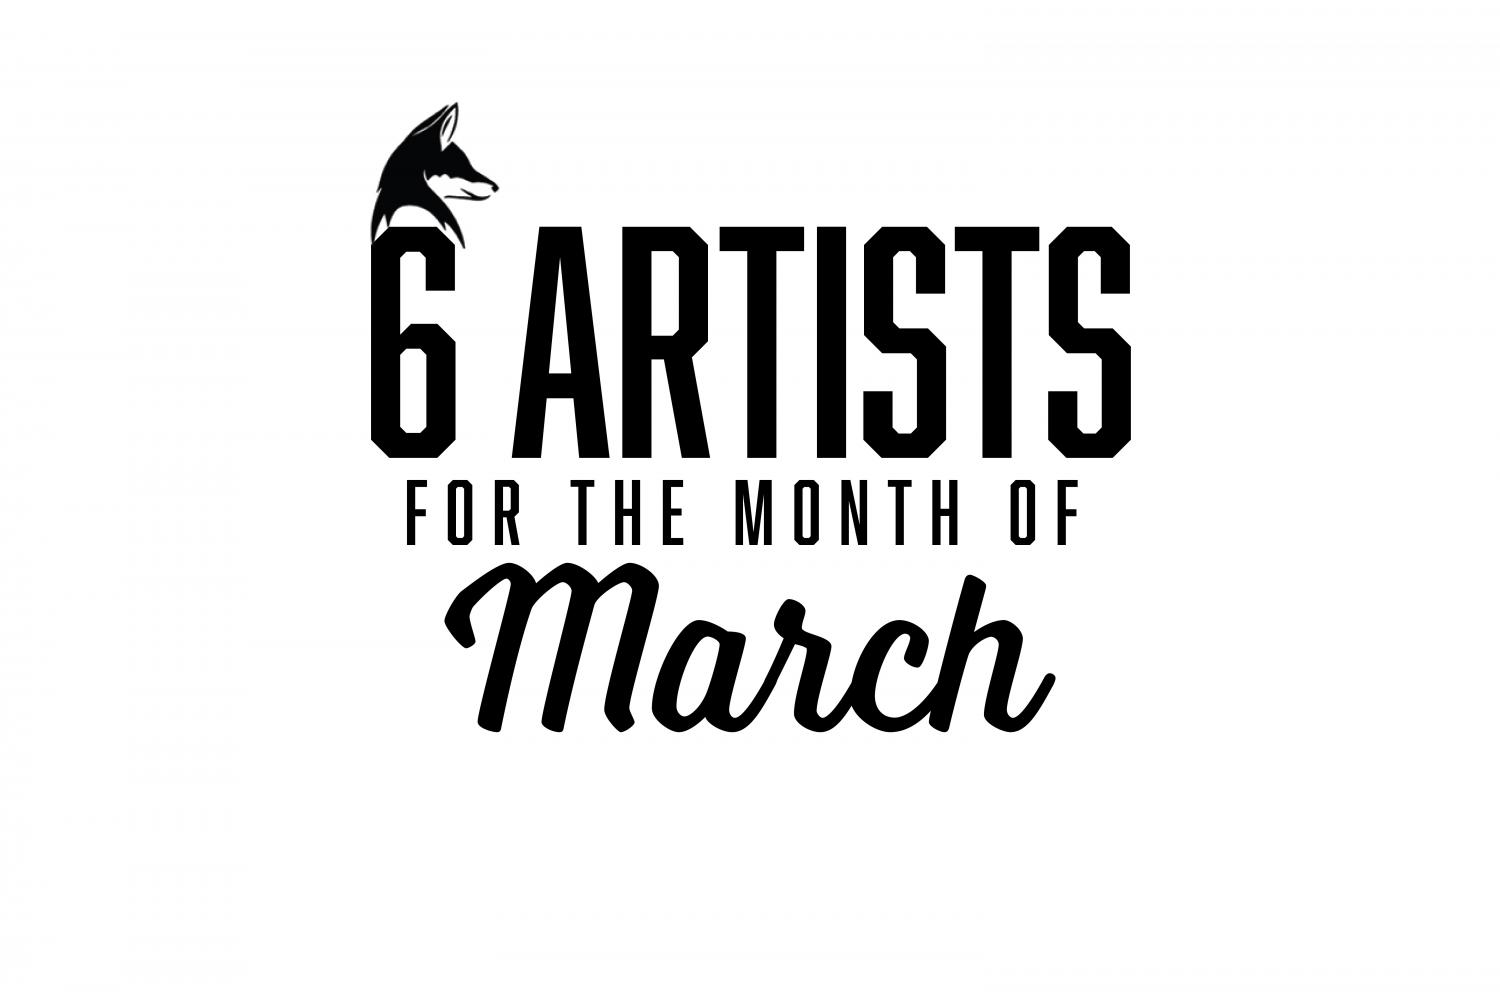 Six+Artists+You+Should+Be+Listening+To%3A+March+2021+EDITION